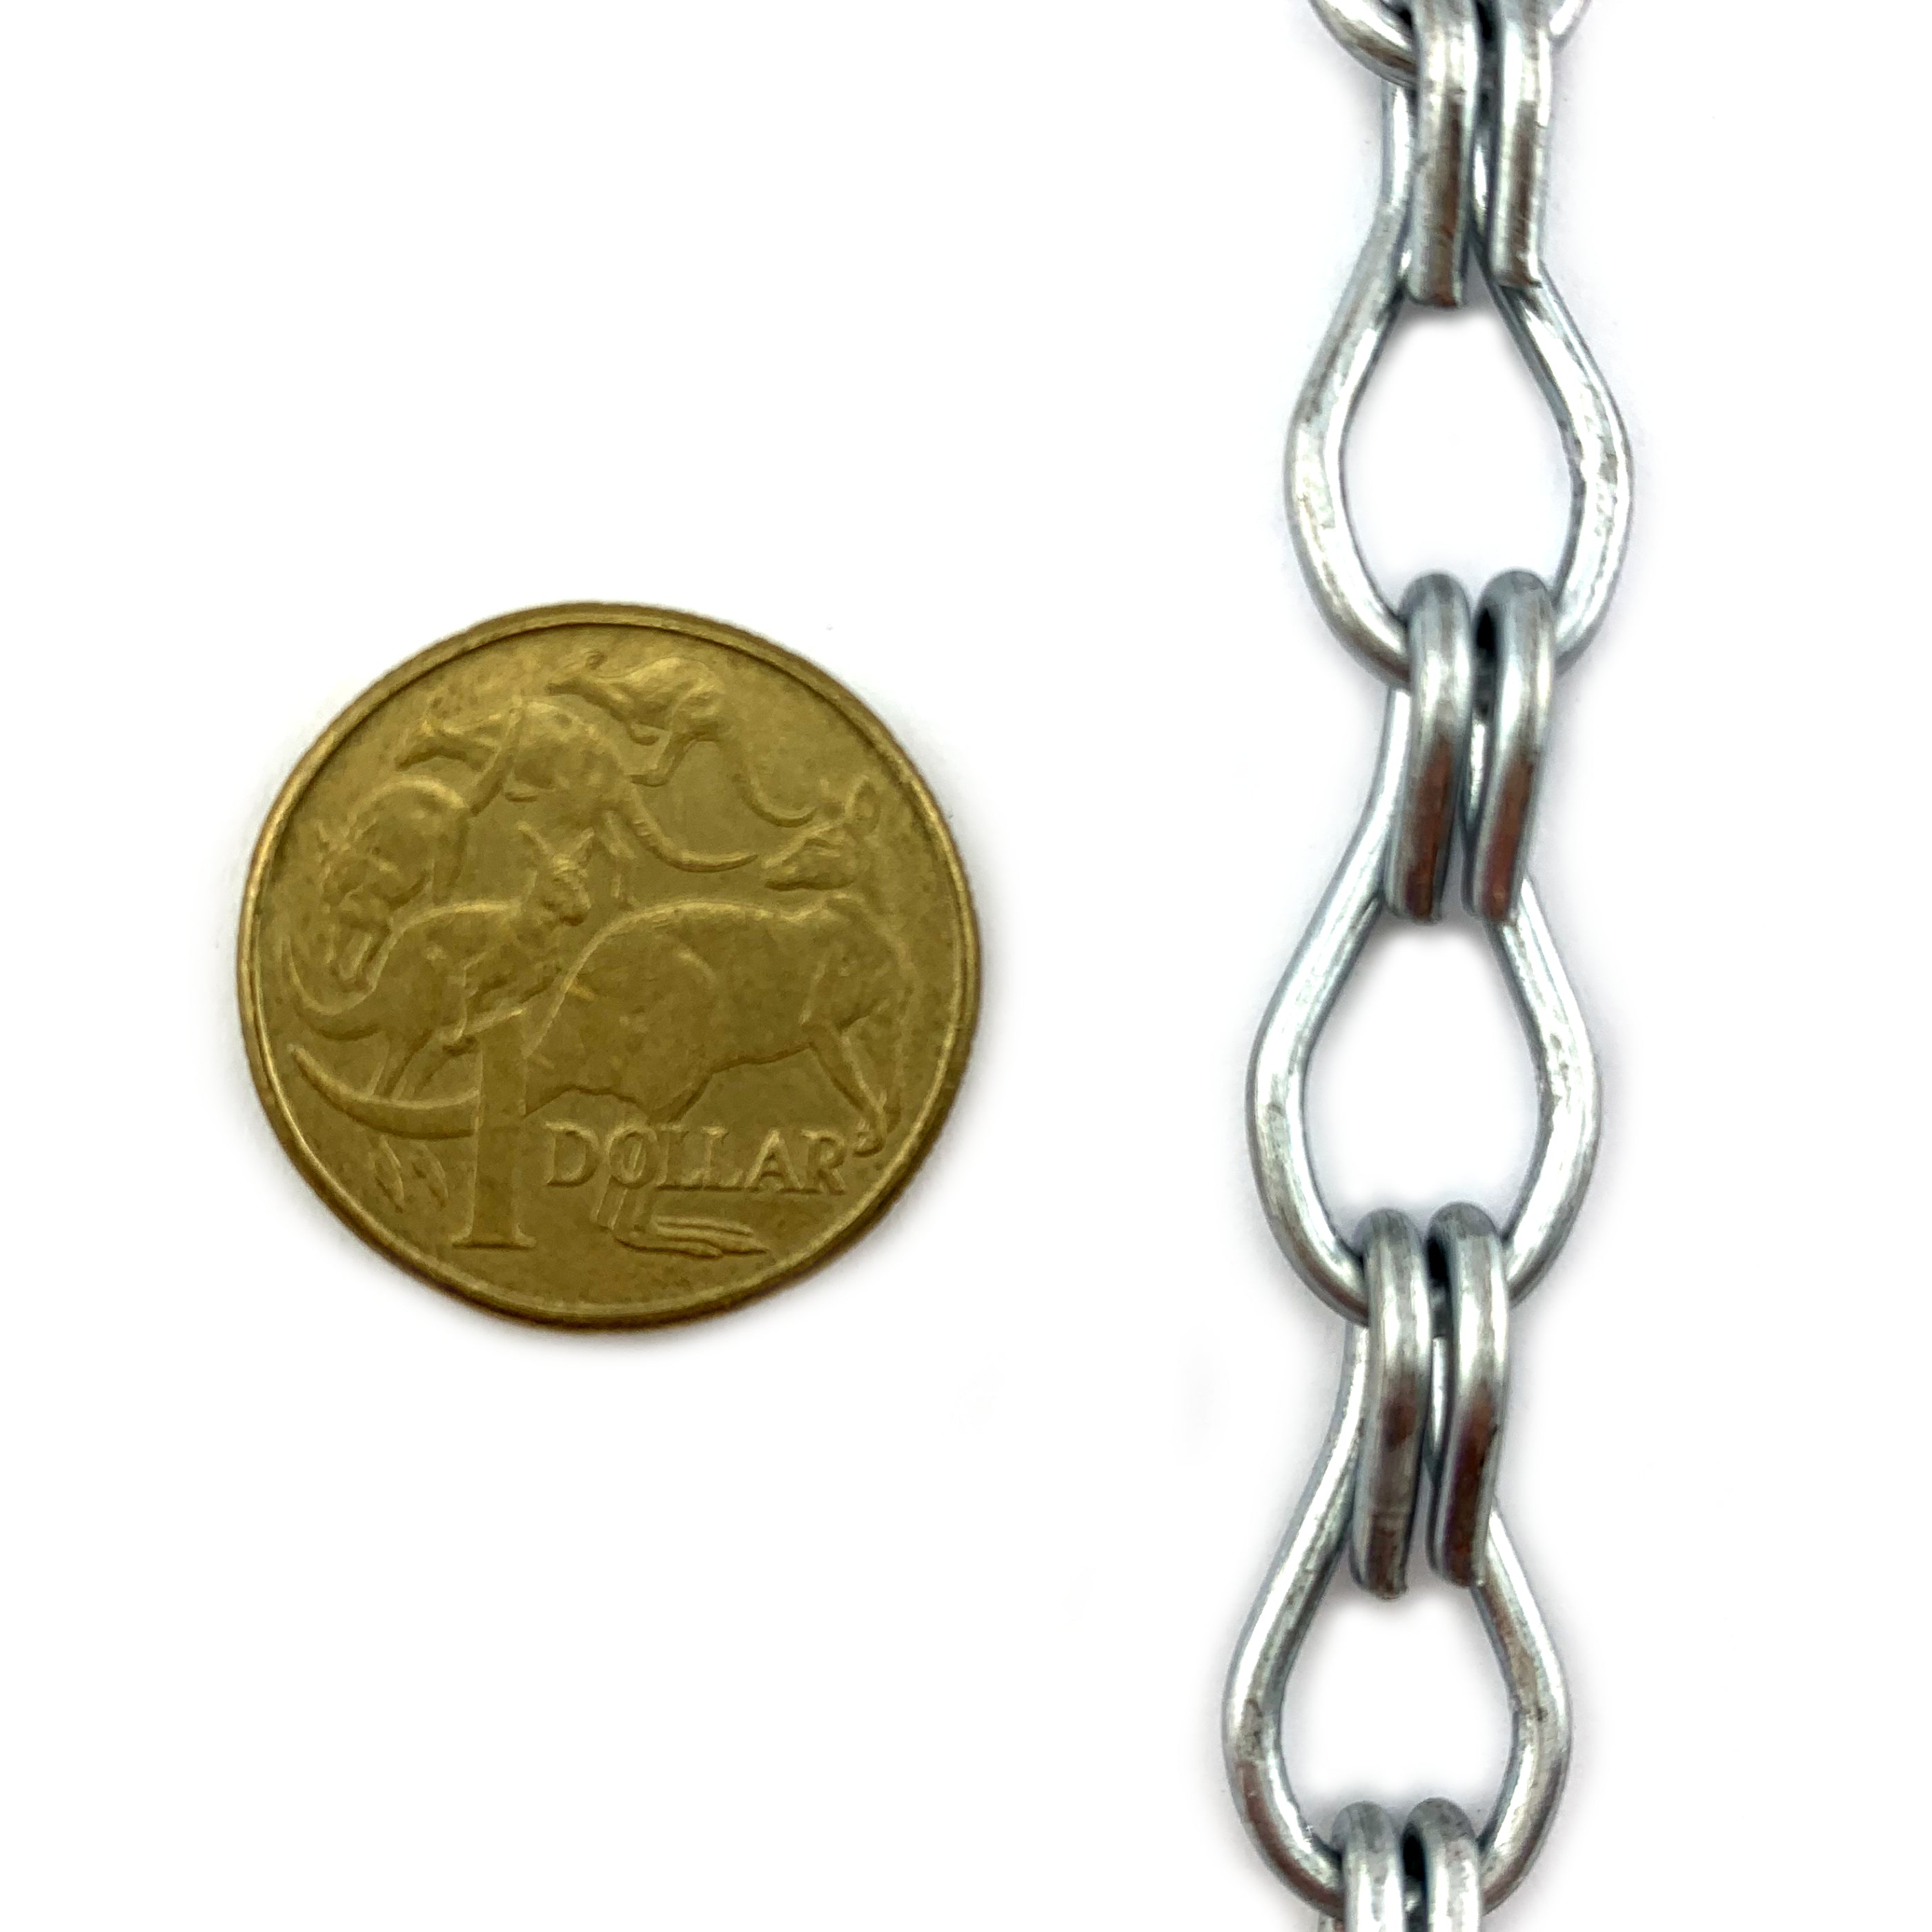 Double Jack Chain Galvanised size: 2mm x 125 metres. Australian made.